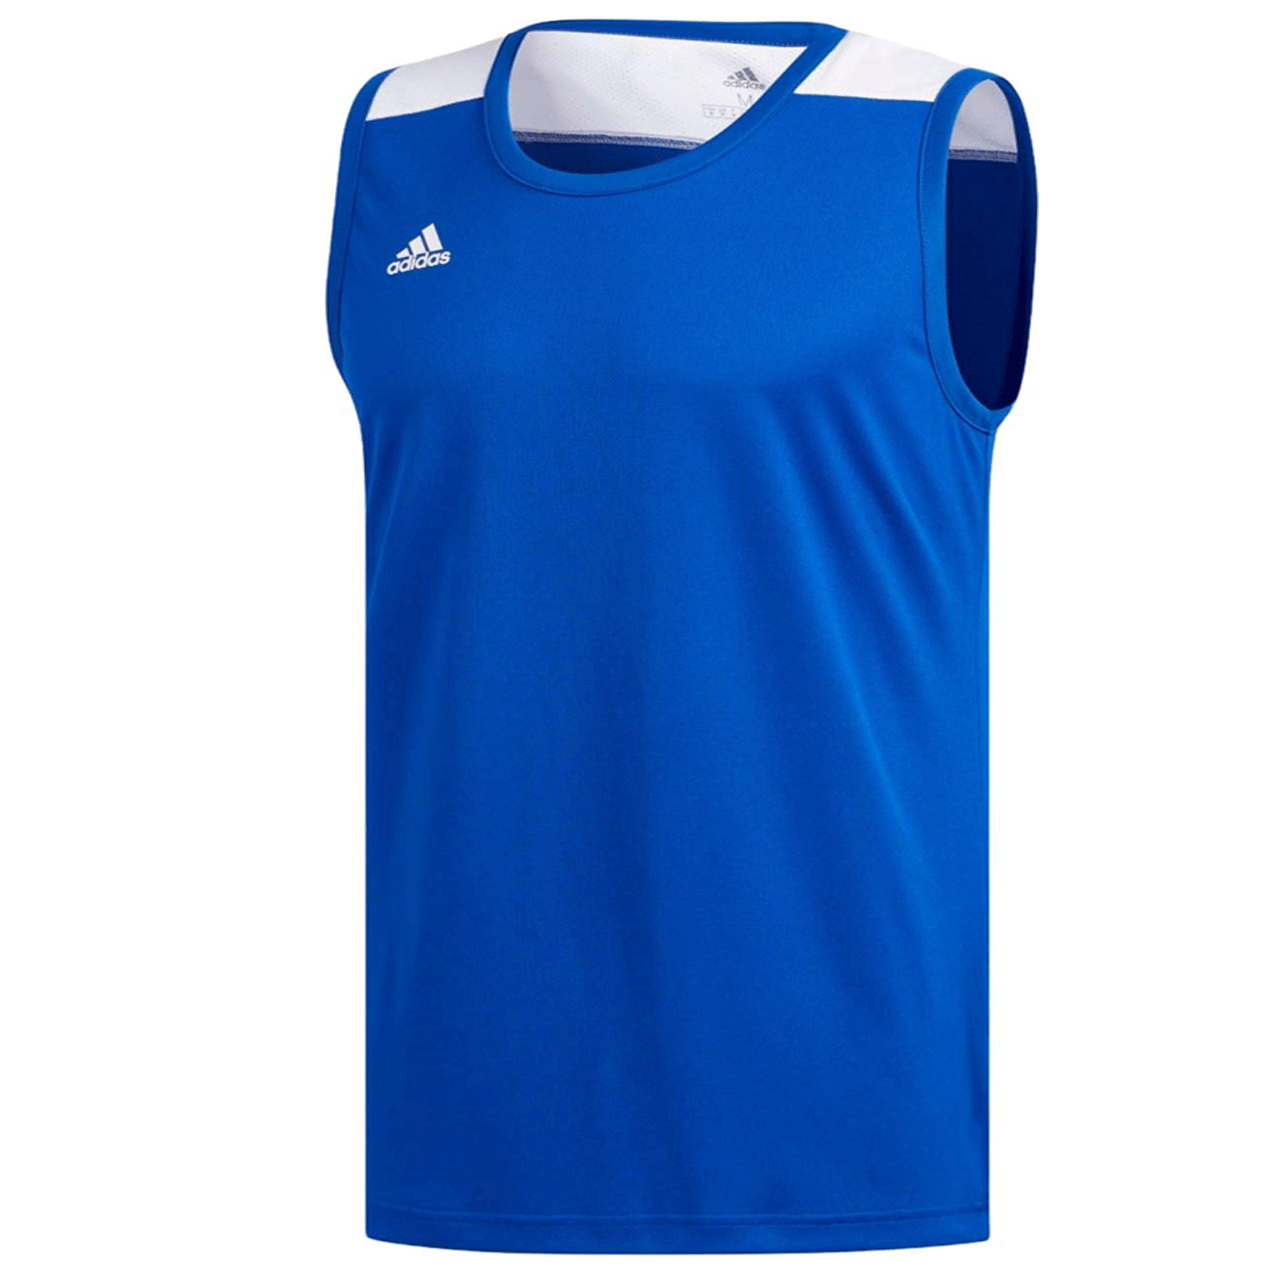 ADIDAS C365 JERSEY BLUE / WHITE DY7370